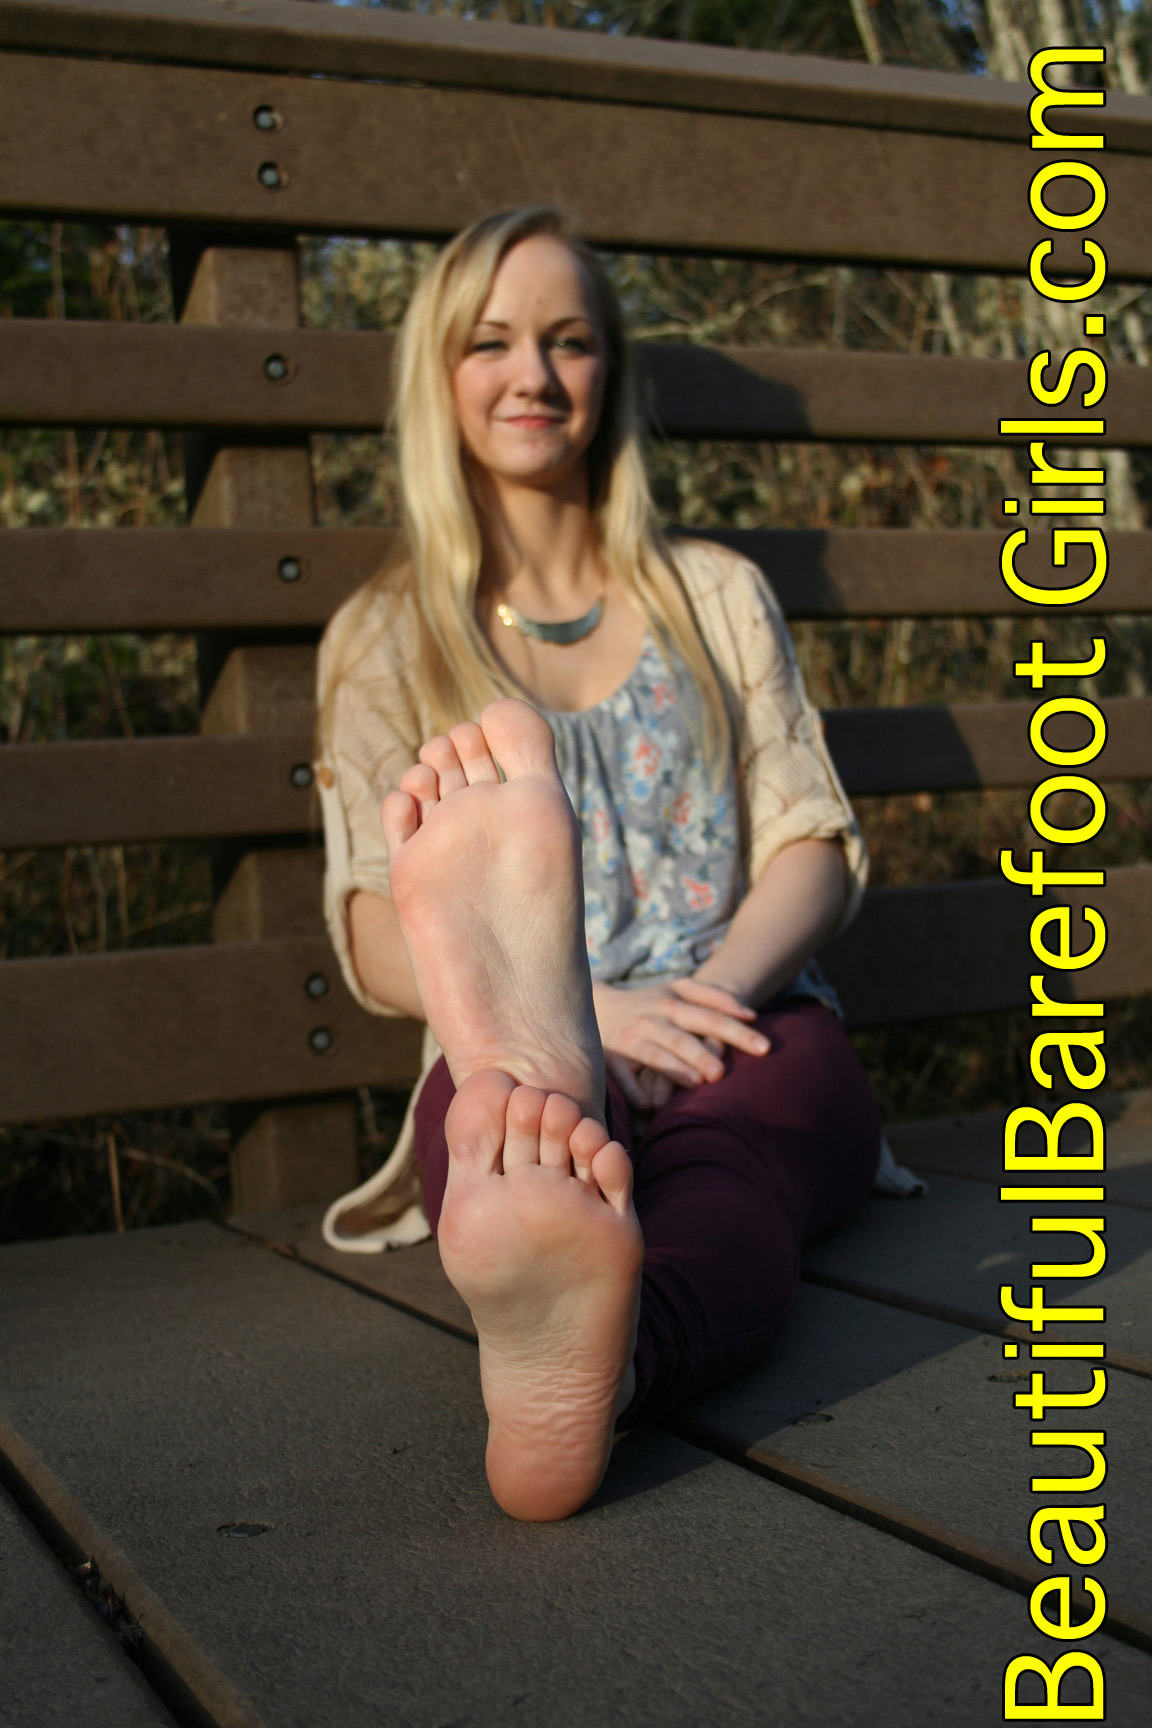 beautifulbarefootgirls:Winter is already barefoot and extending her legs for you